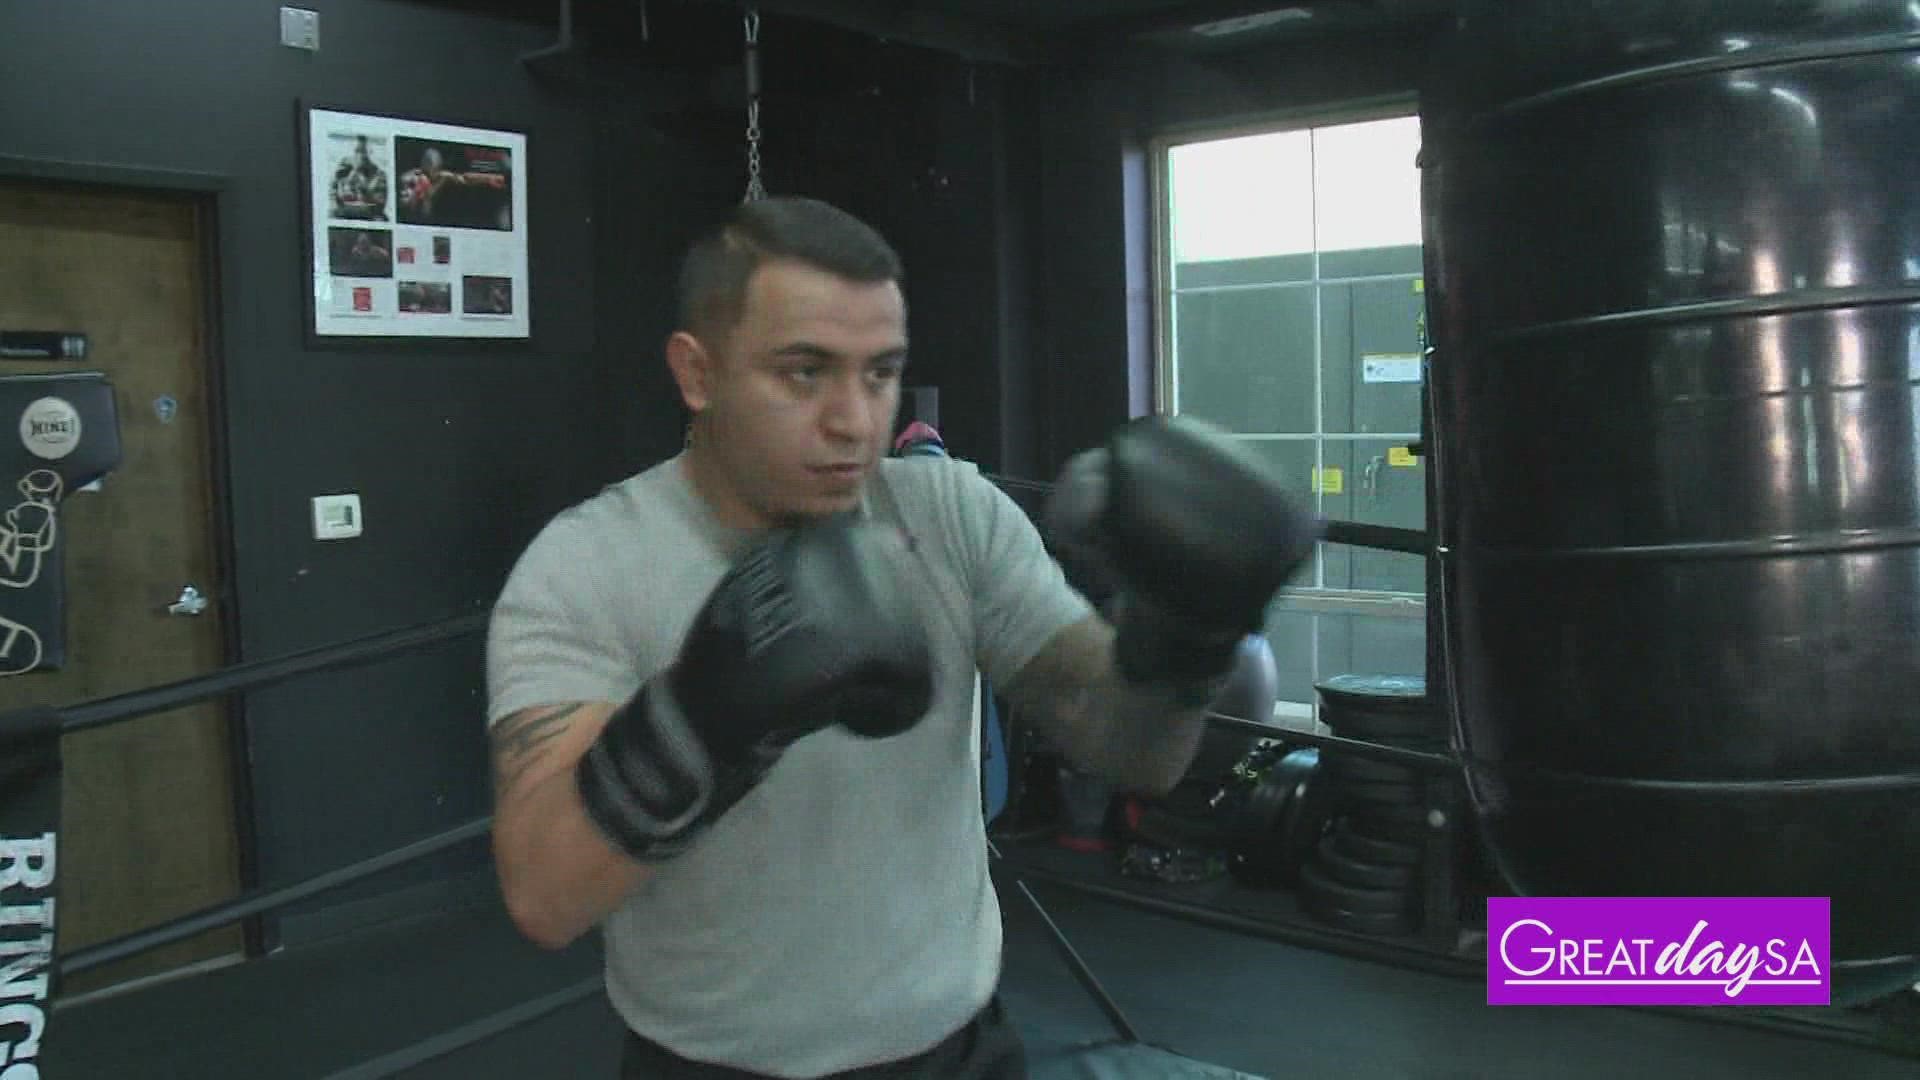 You can get in a cardio workout using basic boxing techniques Great Day SA kens5